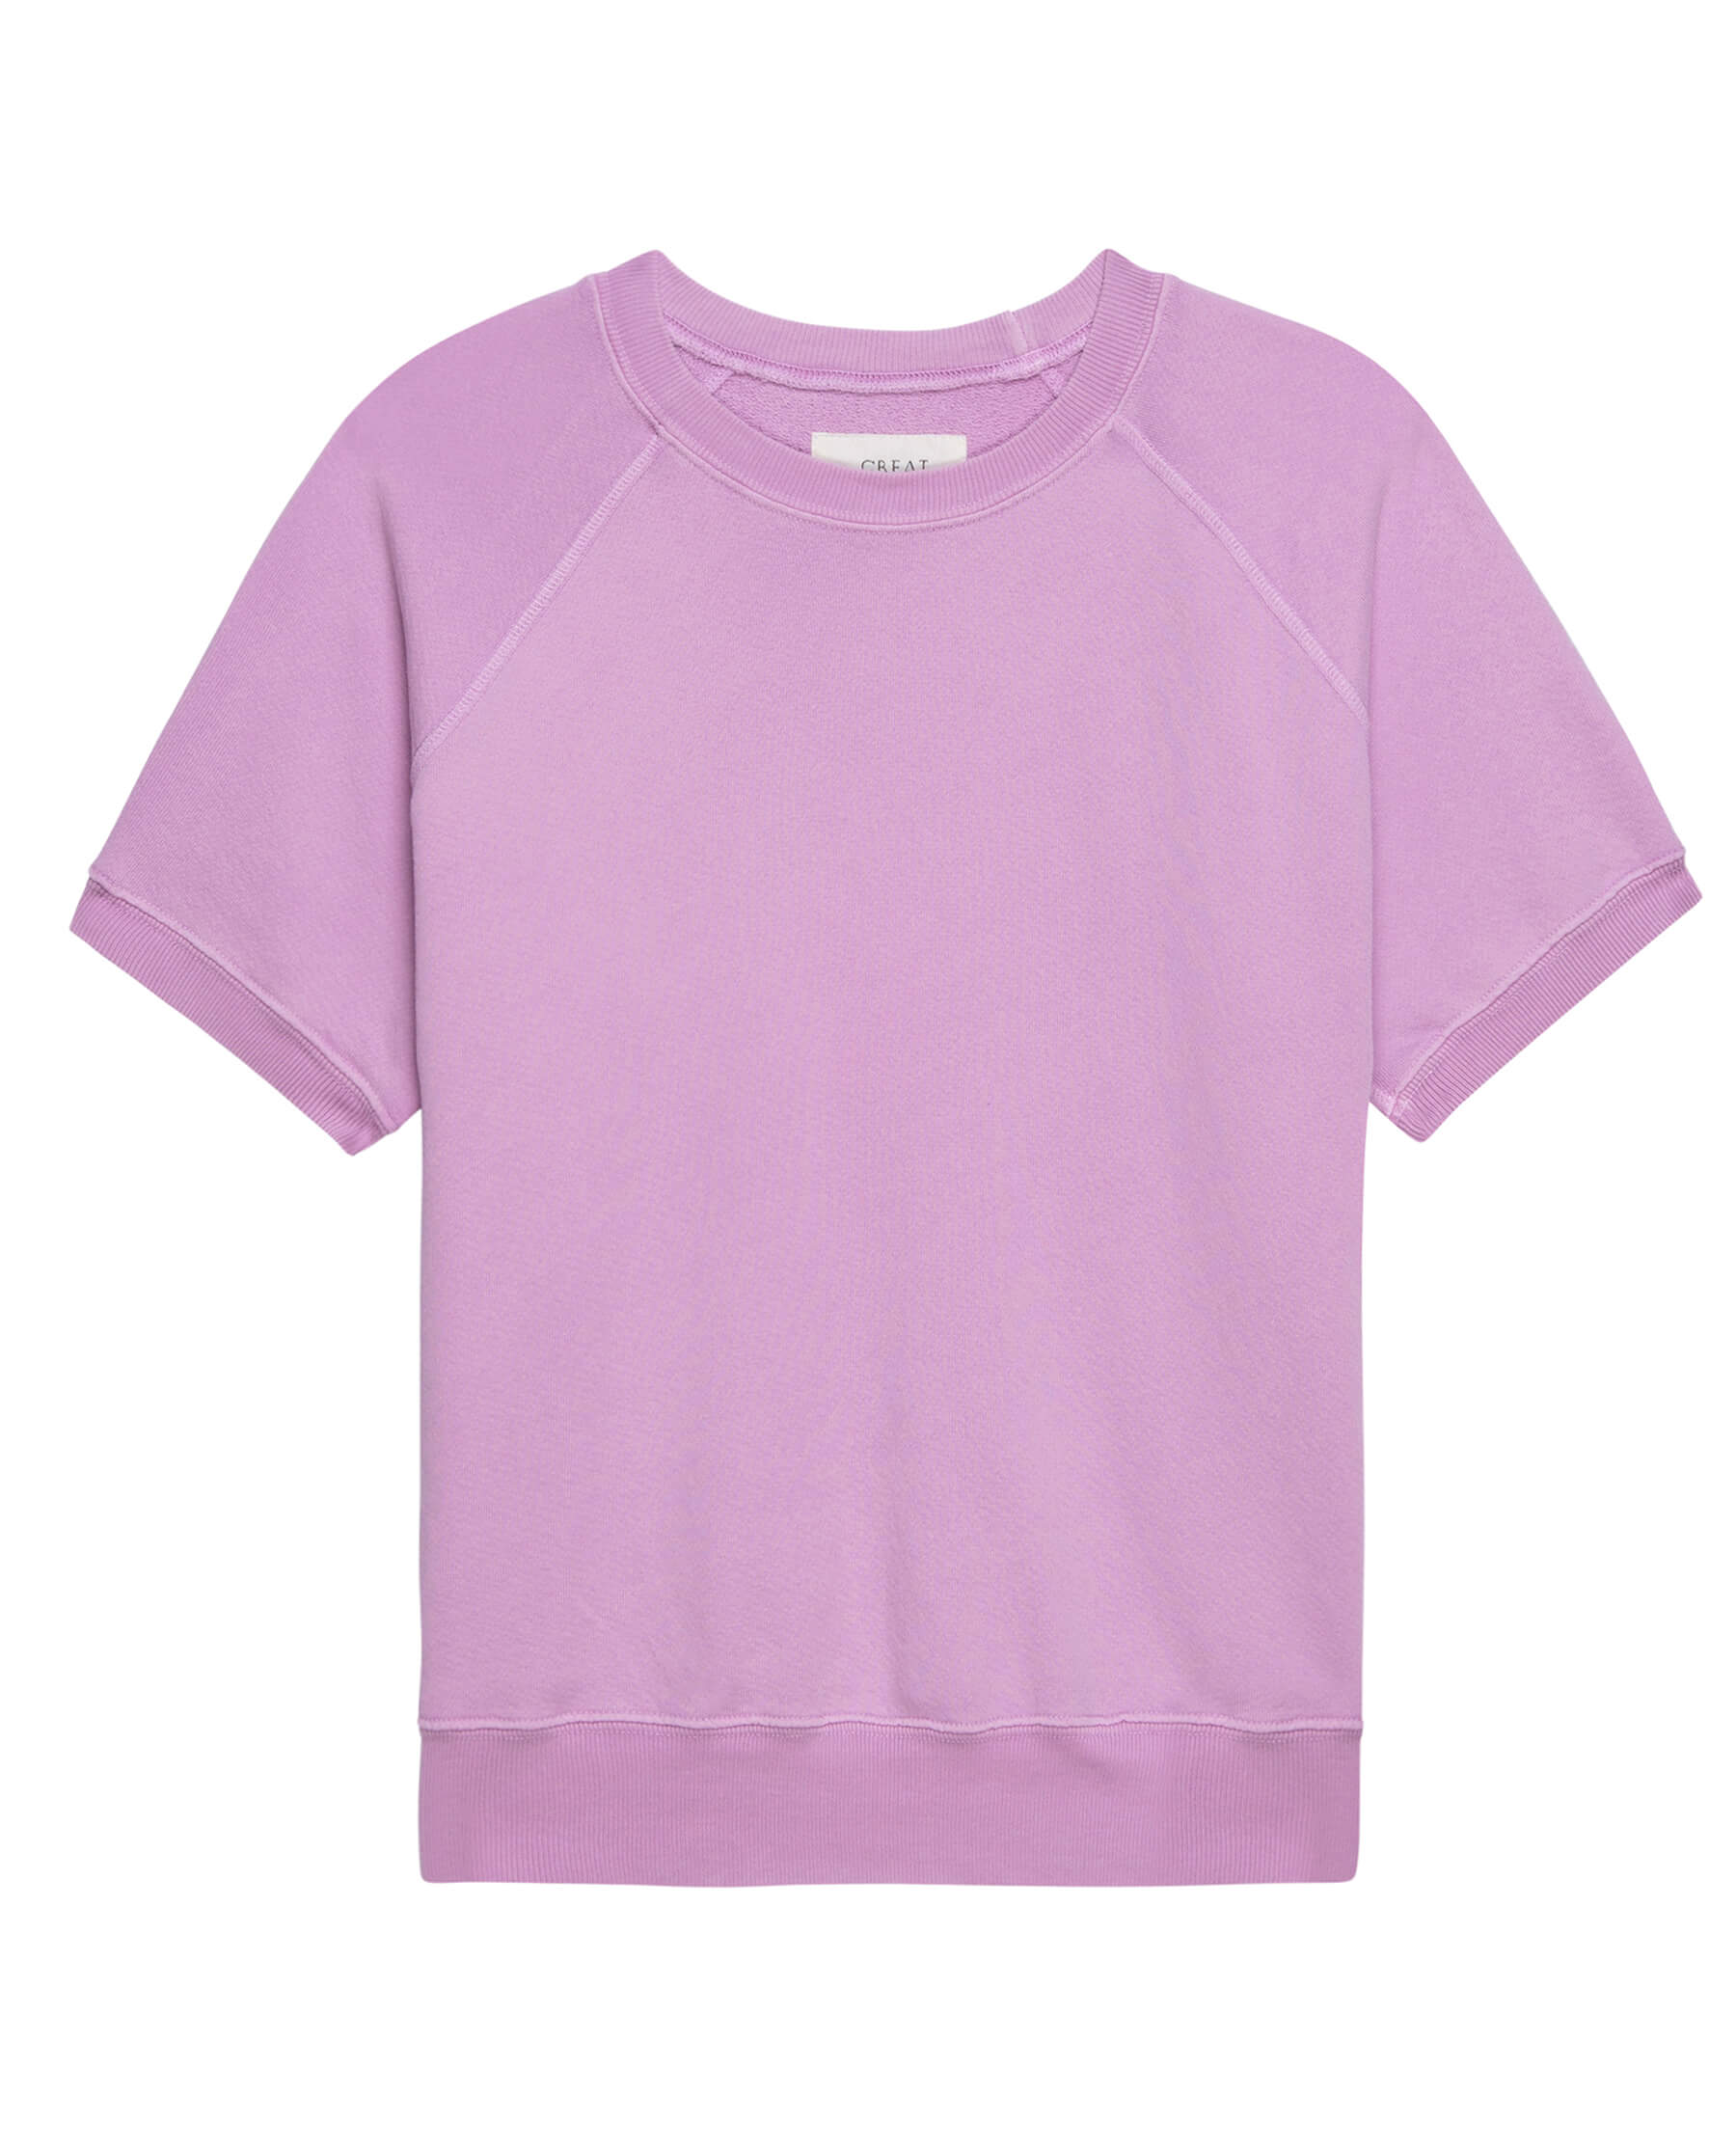 The Short Sleeve Sweatshirt. Solid -- Lilac Blossom SWEATSHIRTS THE GREAT. SP24 KNITS